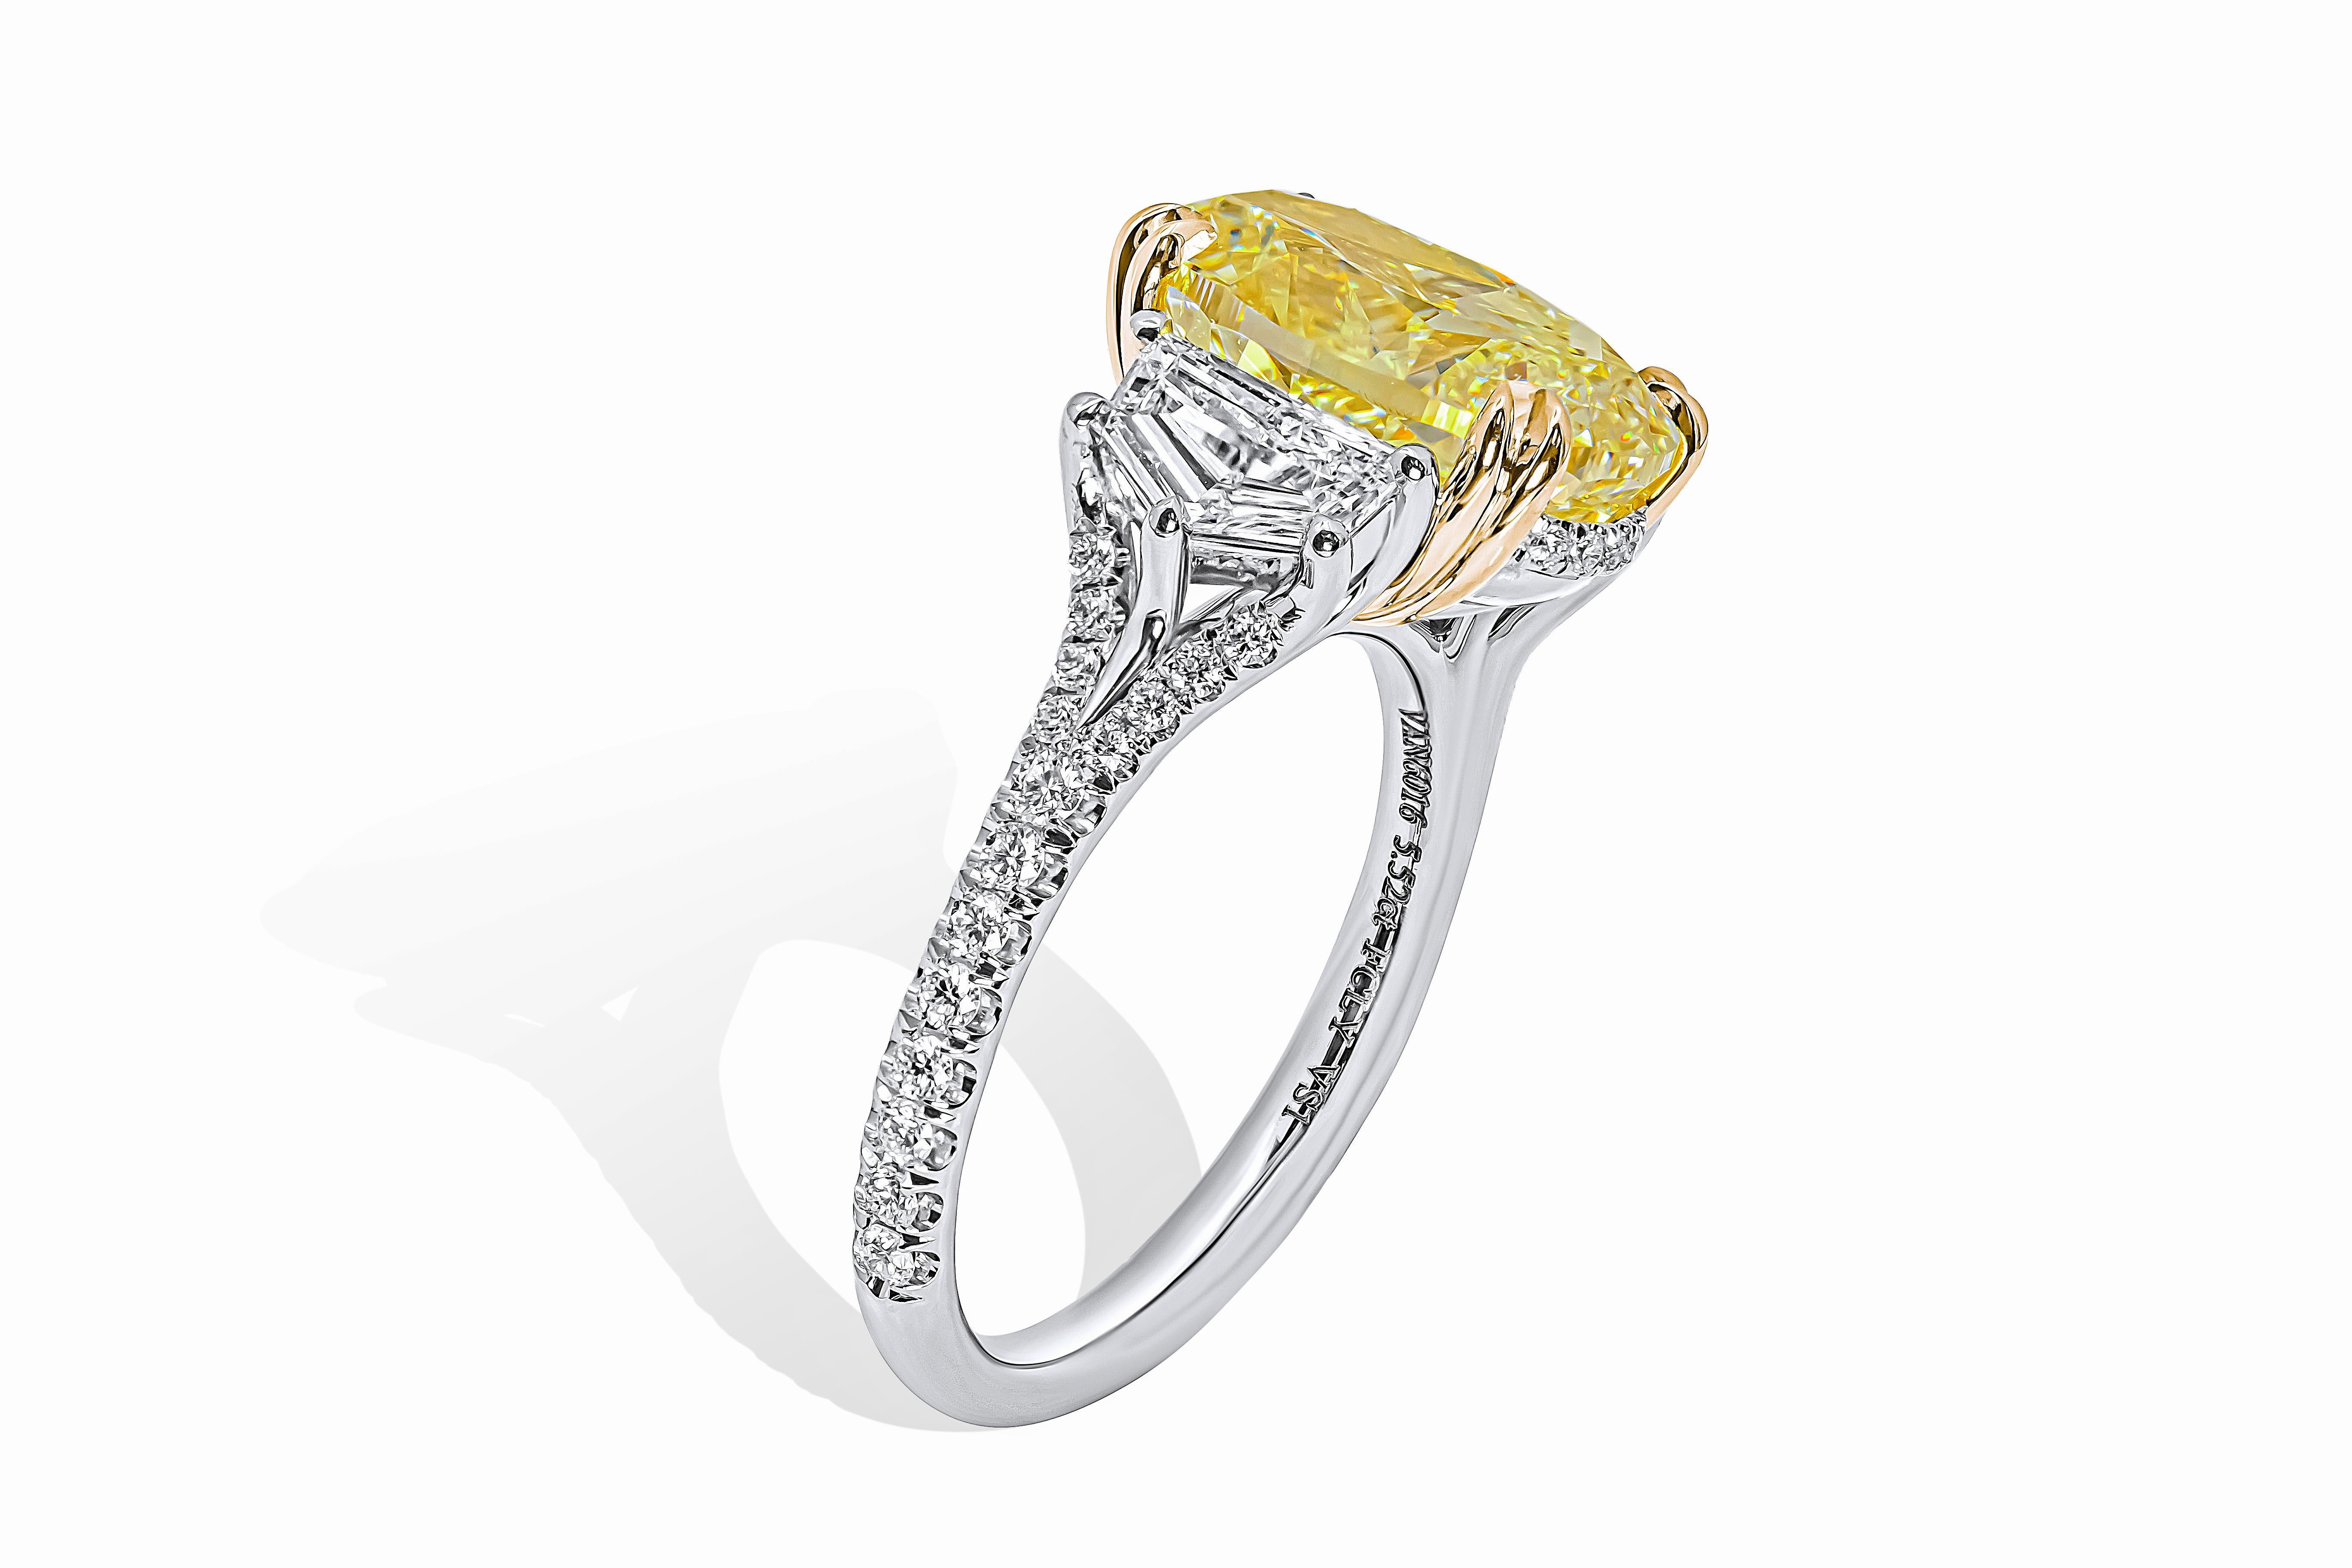 Oval Cut GIA Certified 3 Stone Ring with 5.52ct Fancy Yellow  VS1  Oval Diamond